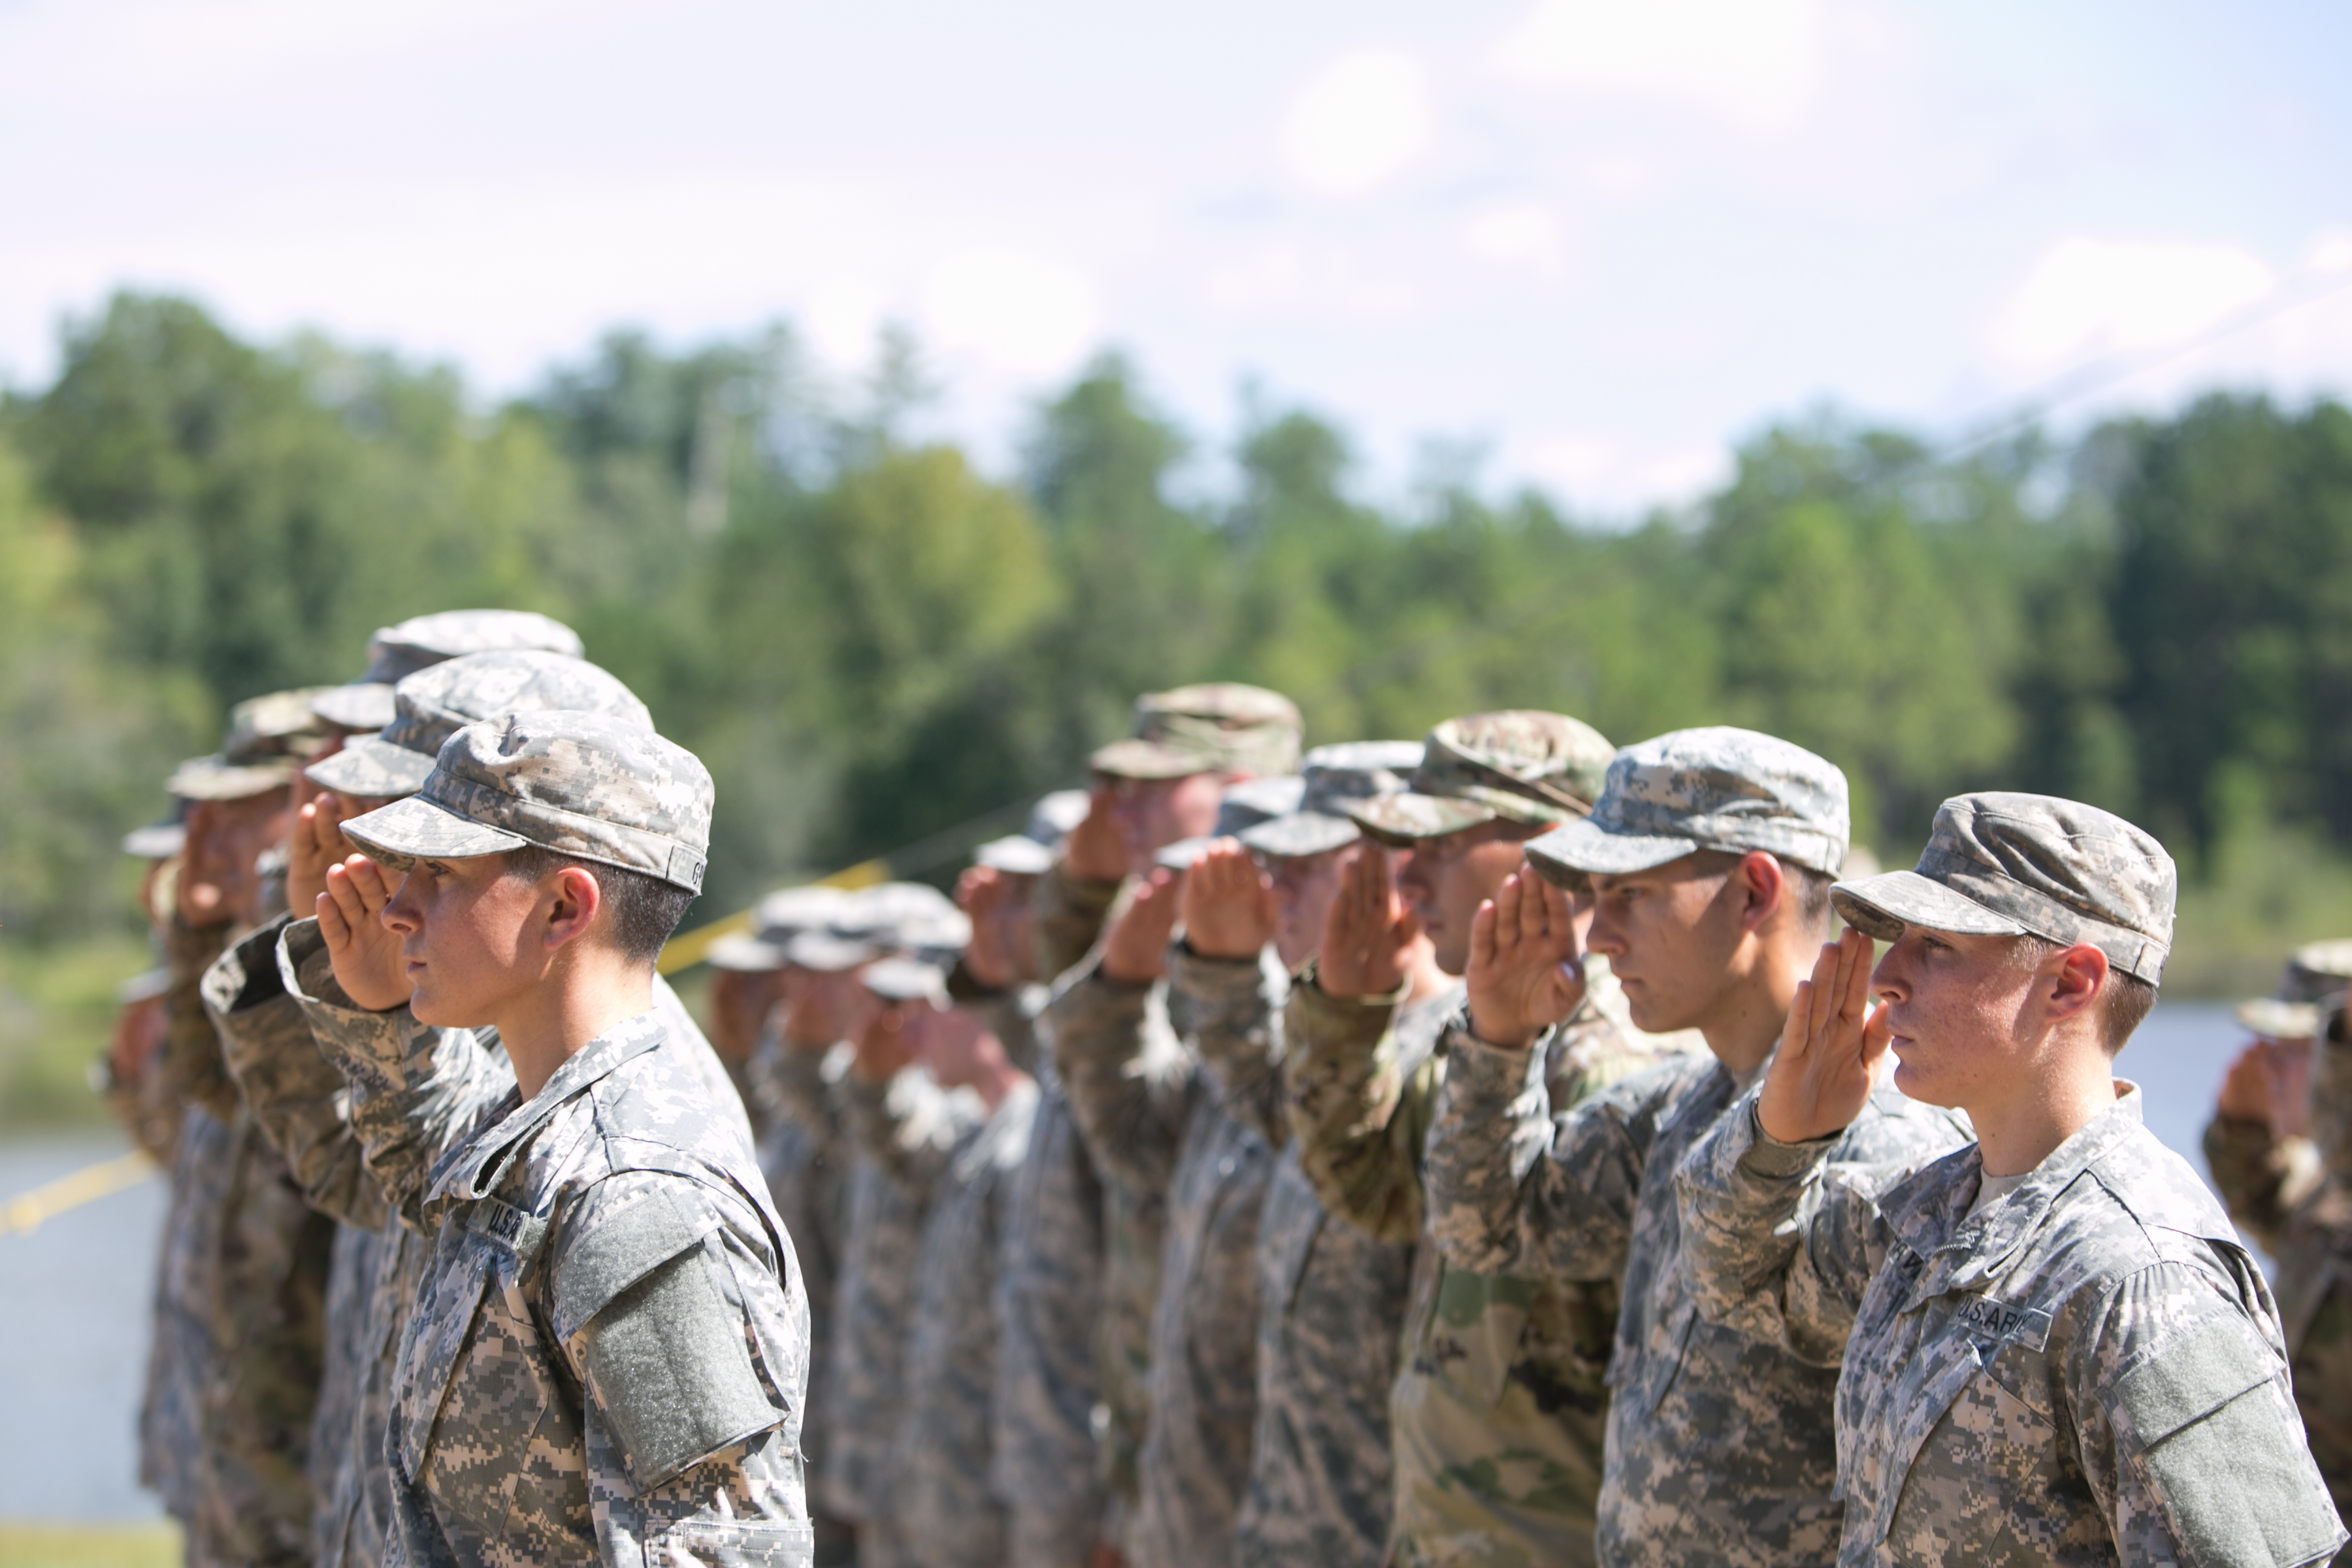 Capt. Kristen Griest (L) and 1st Lt.  Shaye Haver (R) salute during the graduation ceremony of the United States Army's Ranger School at Fort Benning, Georgia on Aug. 21, 2015.  Griest and Haver are the first females to graduate from the Army's intensive Ranger School. (Jessica McGowan—Getty Images)